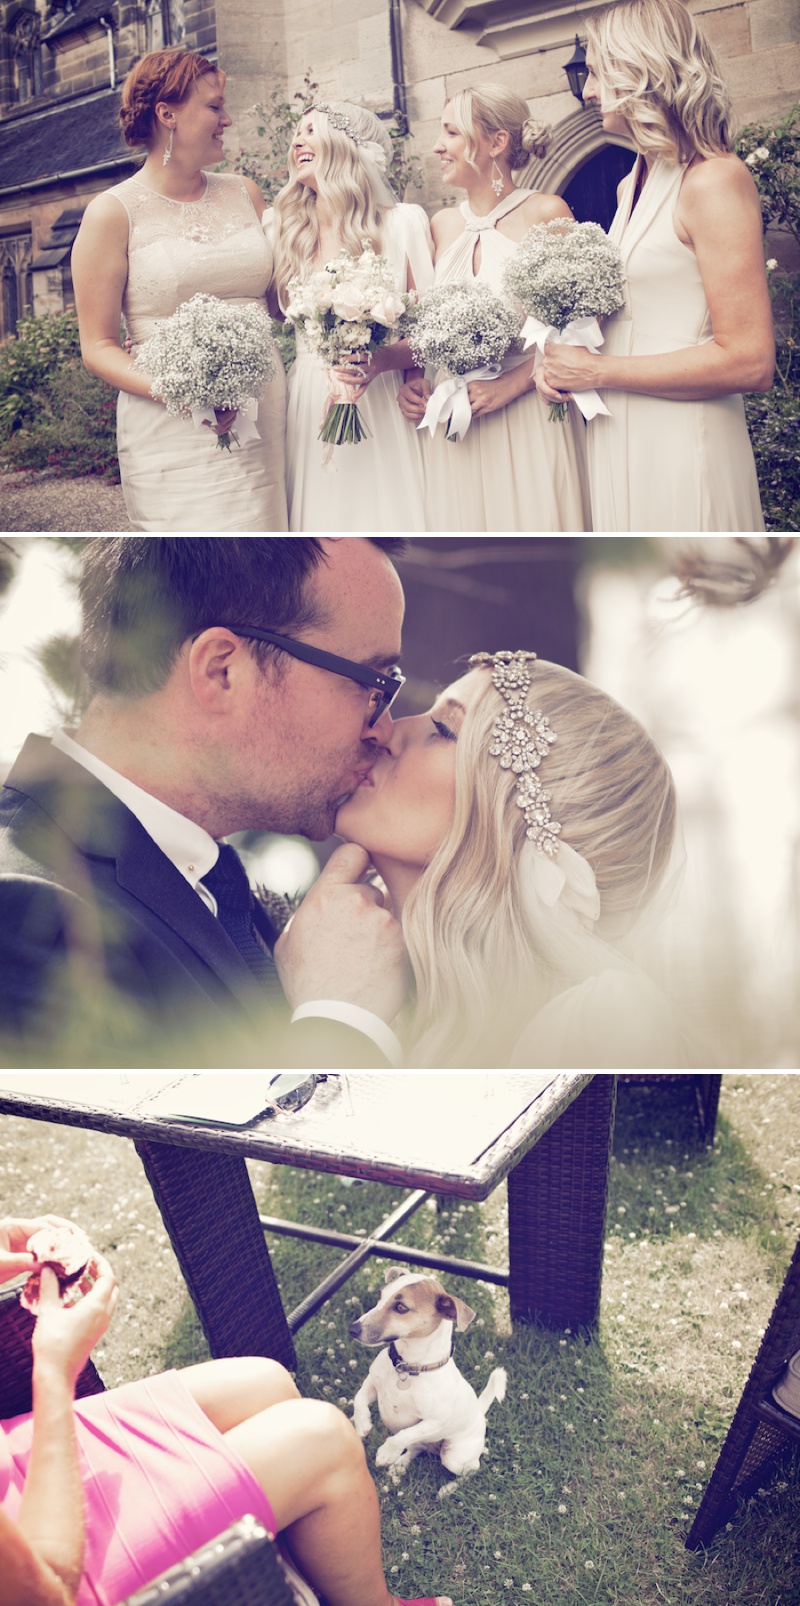 An Ethereal Bohemian Inspired Wedding At Standlow Farm With Tipis From Papakata A David Fielden Dress And Juliet Cap Veil With A Sweet Avalanche Rose Bouquet 10 Silver Words.